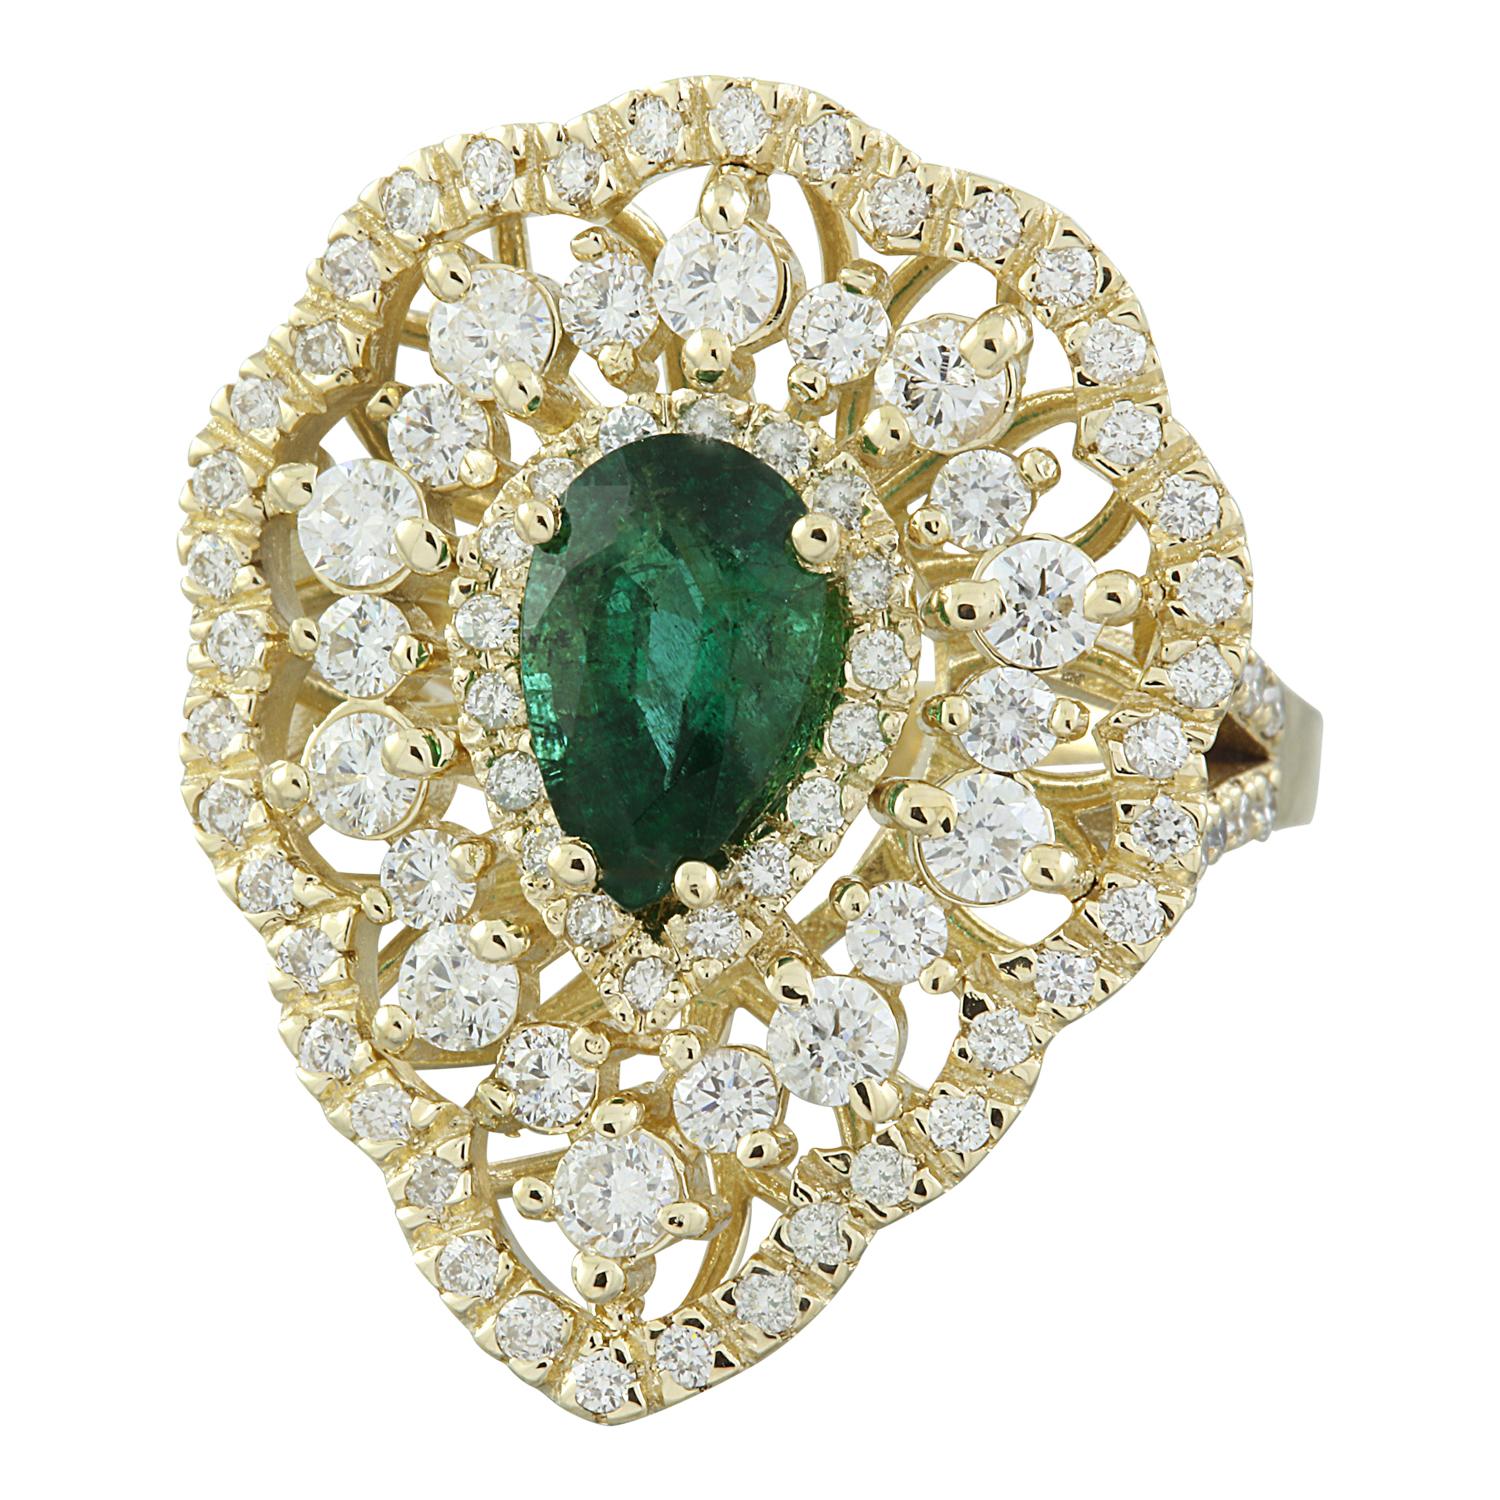 3.41 Carat Natural Emerald 14 Karat Solid Yellow Gold Diamond Ring
Stamped: 14K 
Total Ring Weight: 10.2 Grams 
Emerald Weight 1.61 Carat (9.00x6.00 Millimeters)
Diamond Weight: 1.80 carat (F-G Color, VS2-SI1 Clarity )
Face Measures: 27.30x22.30